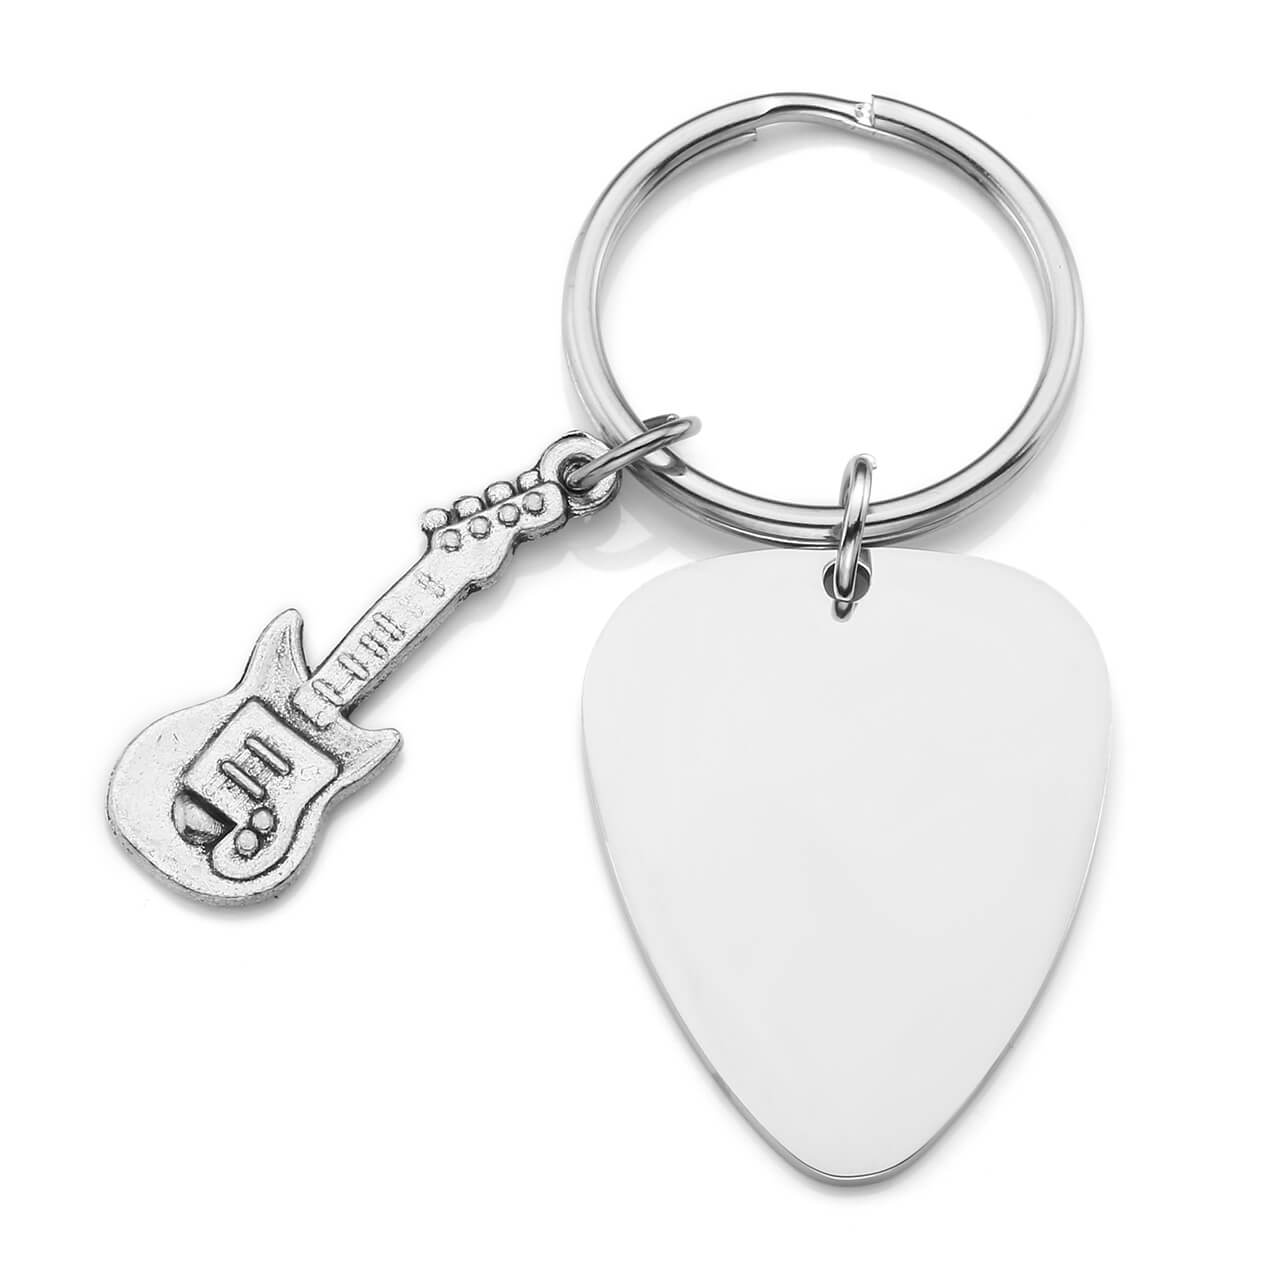 jnf001802 jovivi personalized custom guitar pick keychain for best friends with guitar charm